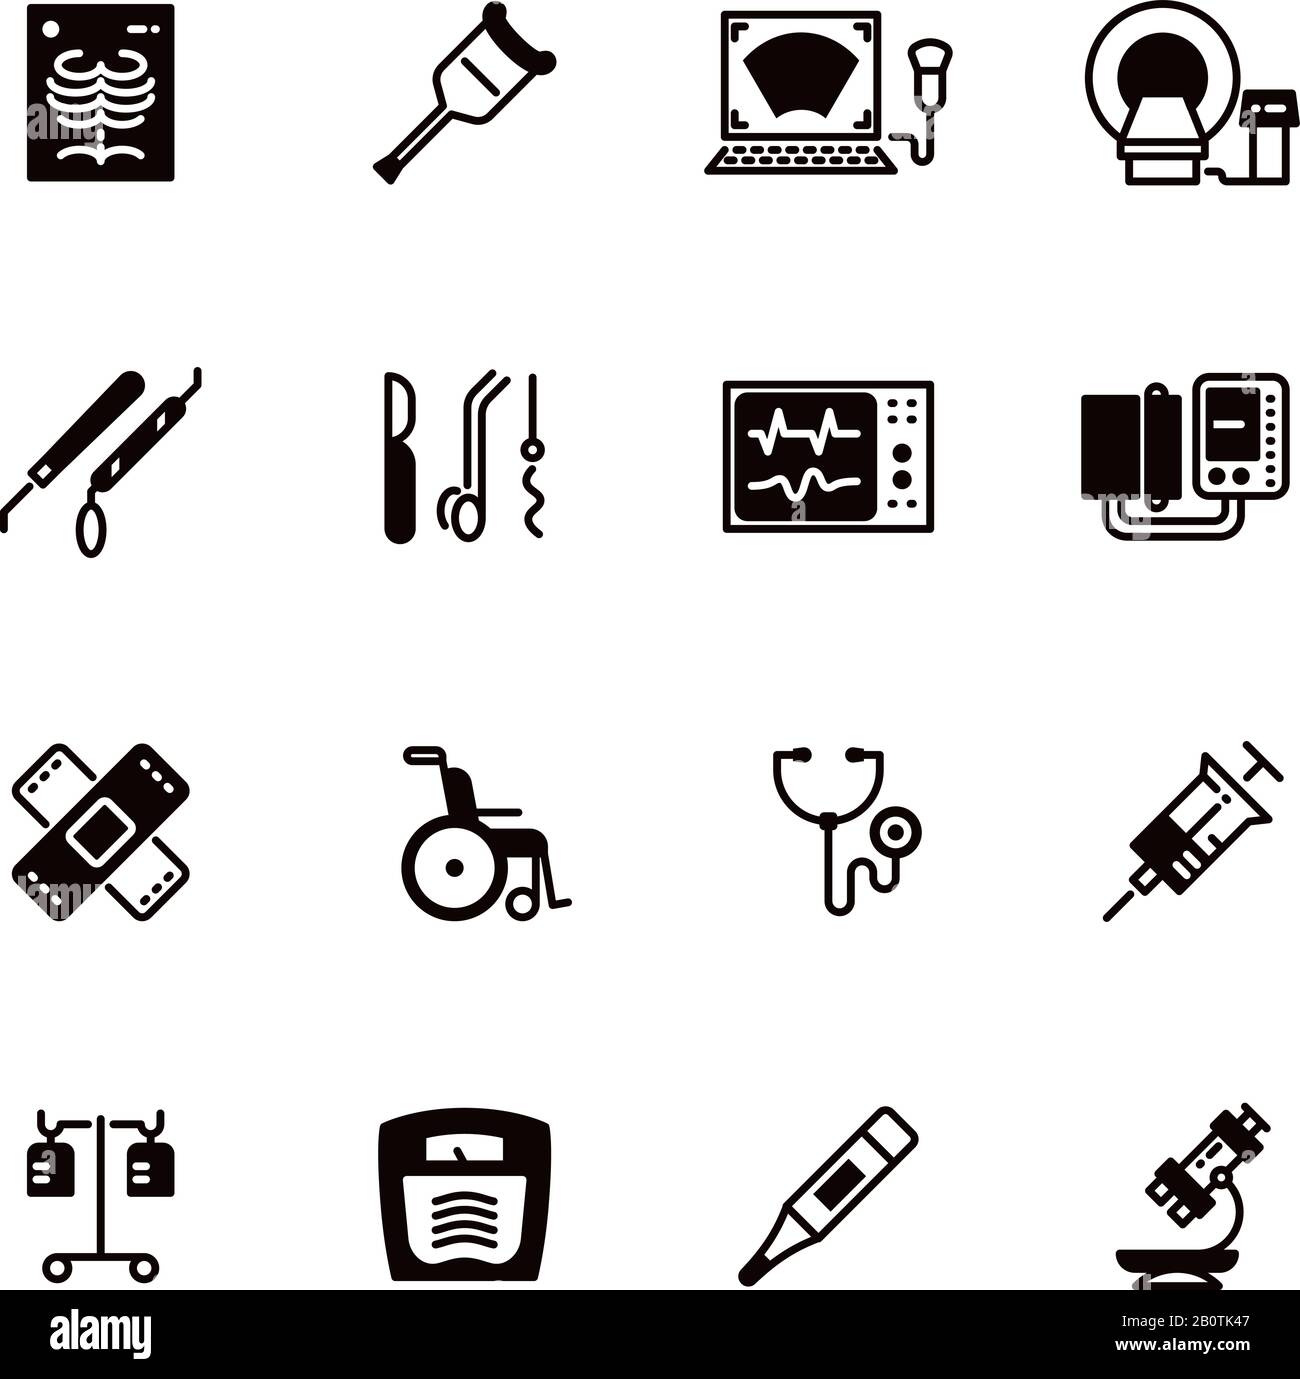 Medical devices and equipment vector icons. Medical tomograph and mrt, ultrasound equipment illustration Stock Vector